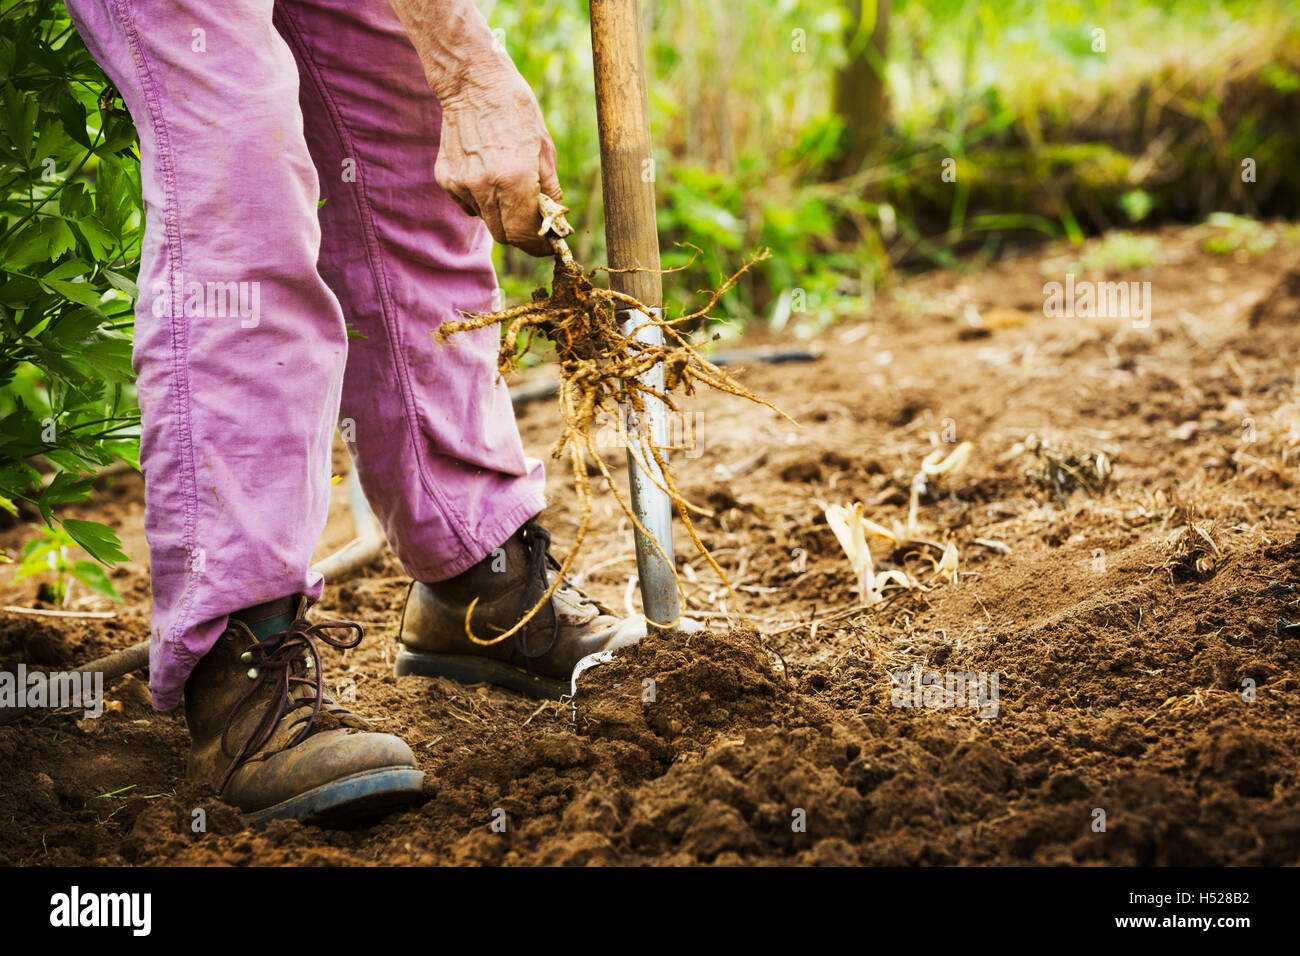 A woman using a pitchfork in a small field. Stock Photo